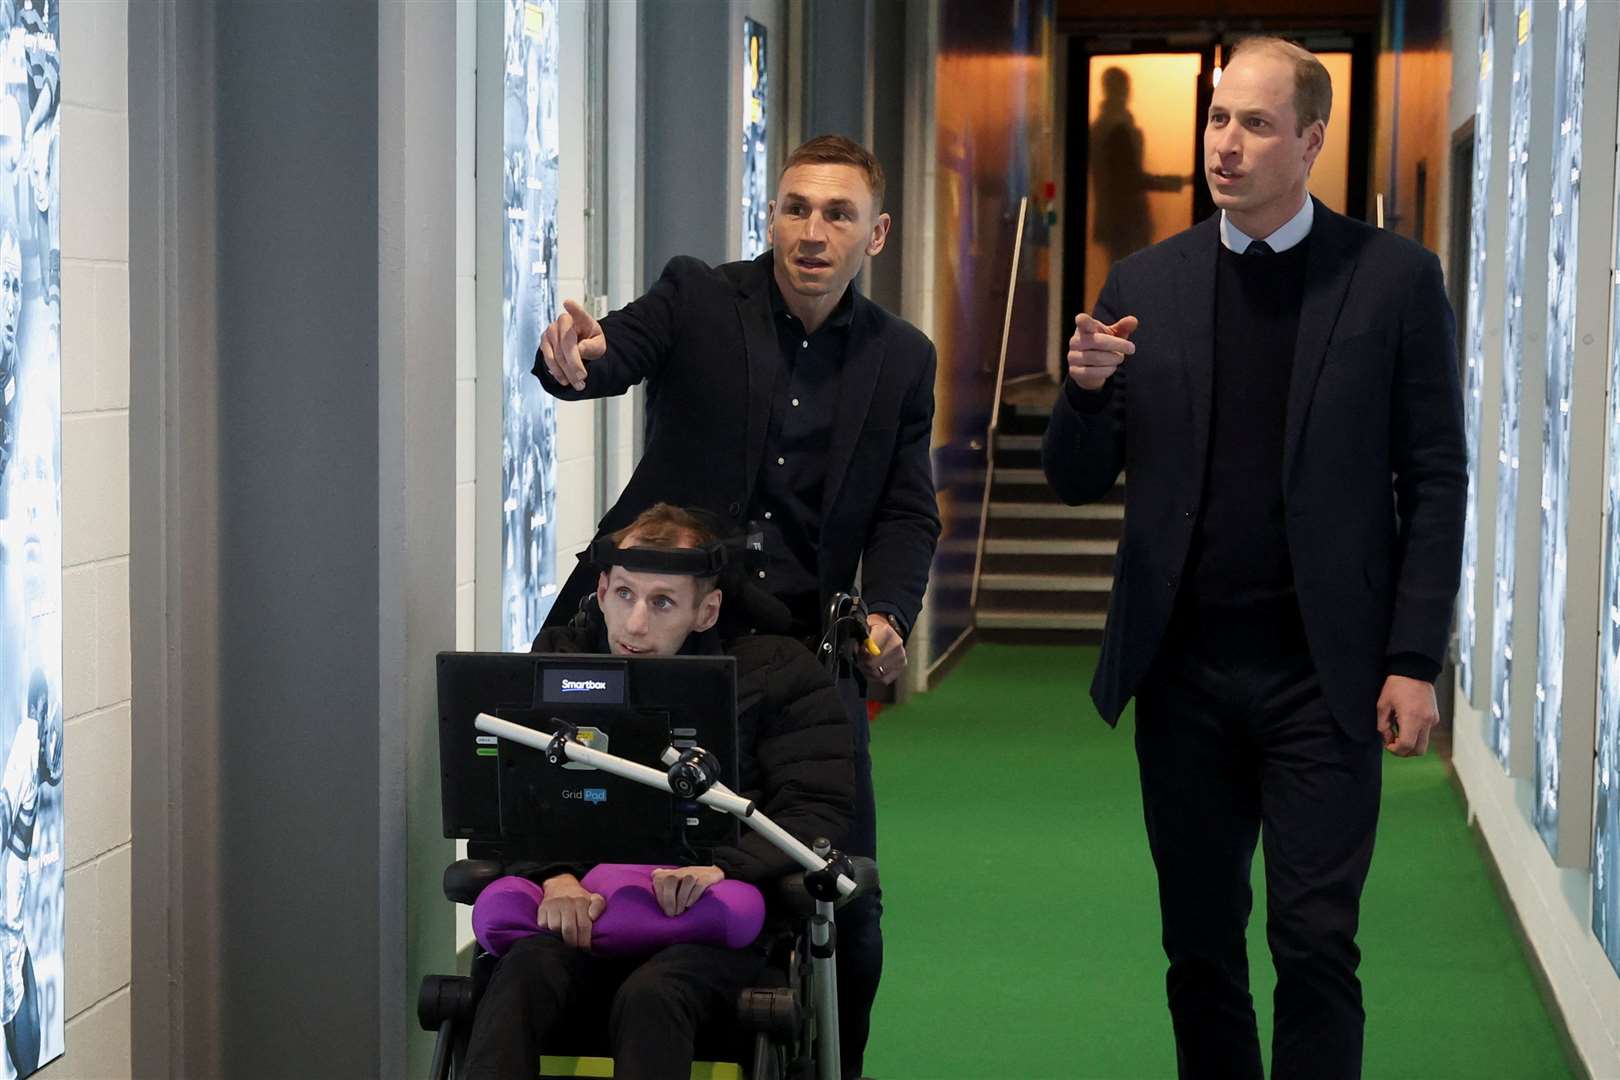 The Prince of Wales meets Rob Burrow and Kevin Sinfield during a visit to Headingley Stadium (Phil Noble/PA)